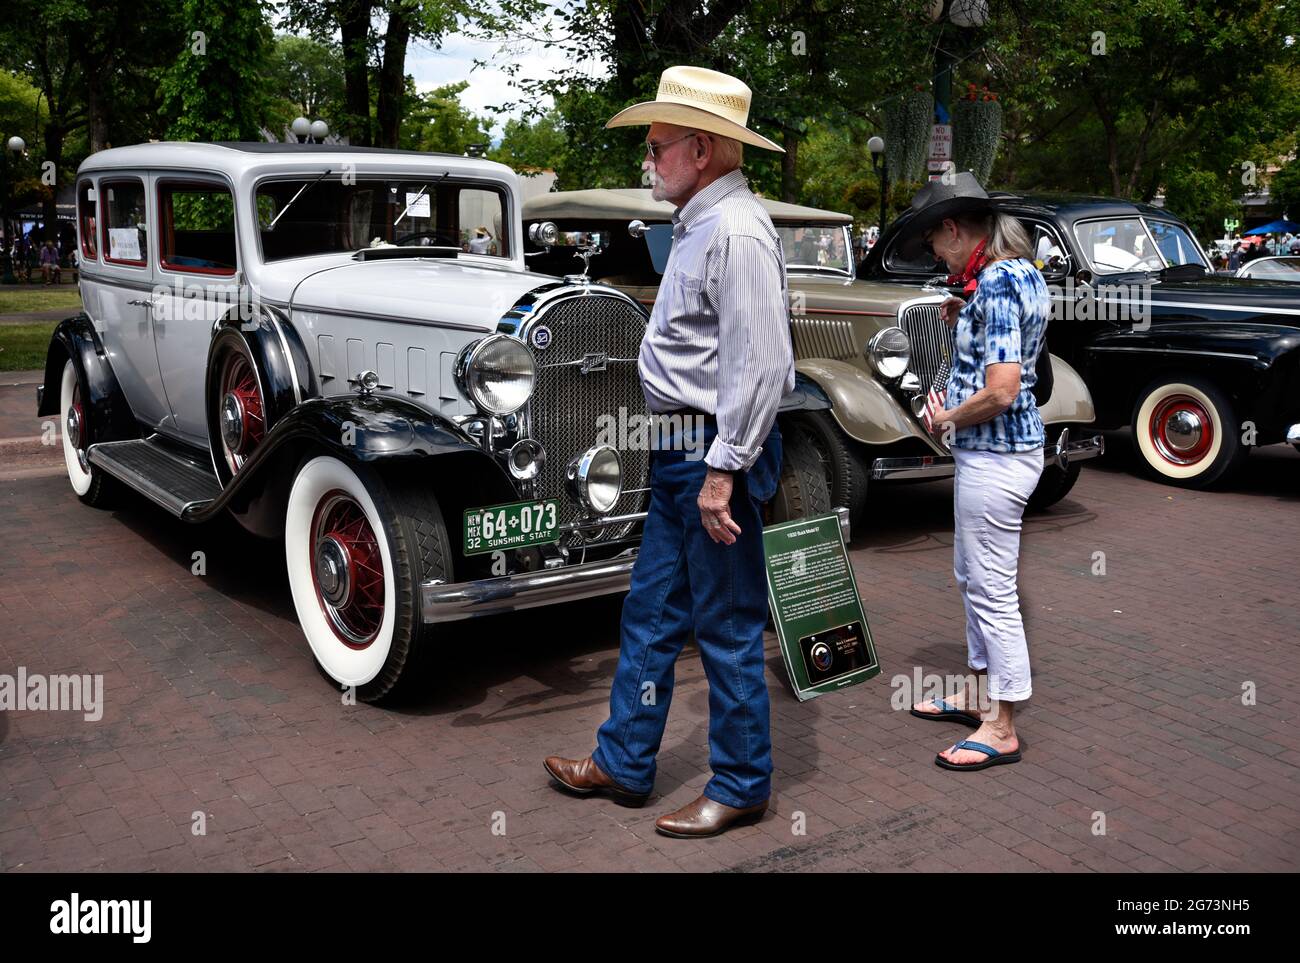 A 1932 Buick sedan on display at Fourth of July antique and vintage car show in Santa Fe, New Mexico. Stock Photo